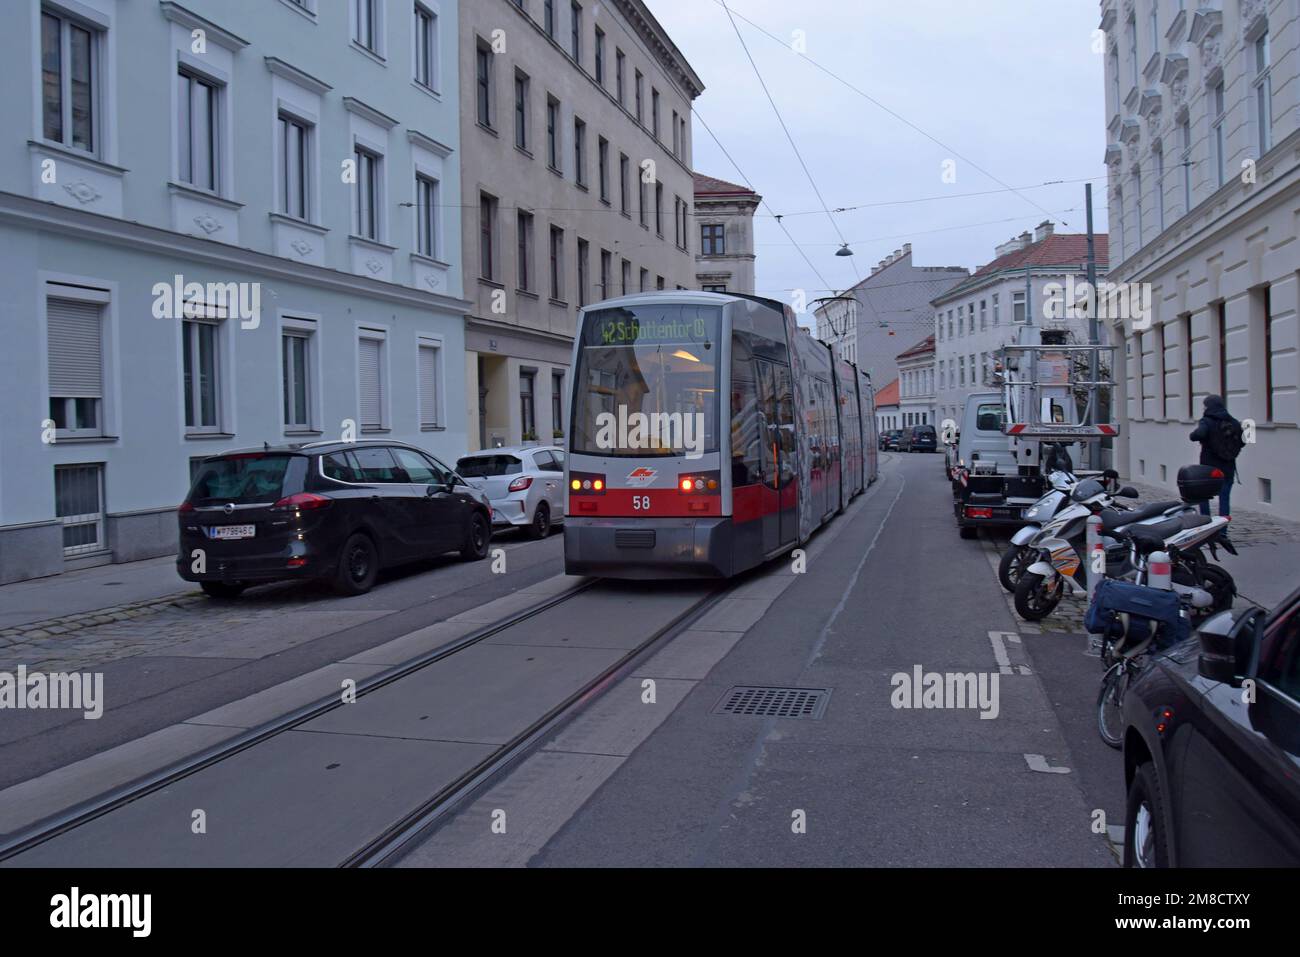 A Vienna Tram passes the apartment building used as the location for Kara Milovy's apartment in James Bond 007 film The Living Daylights Stock Photo